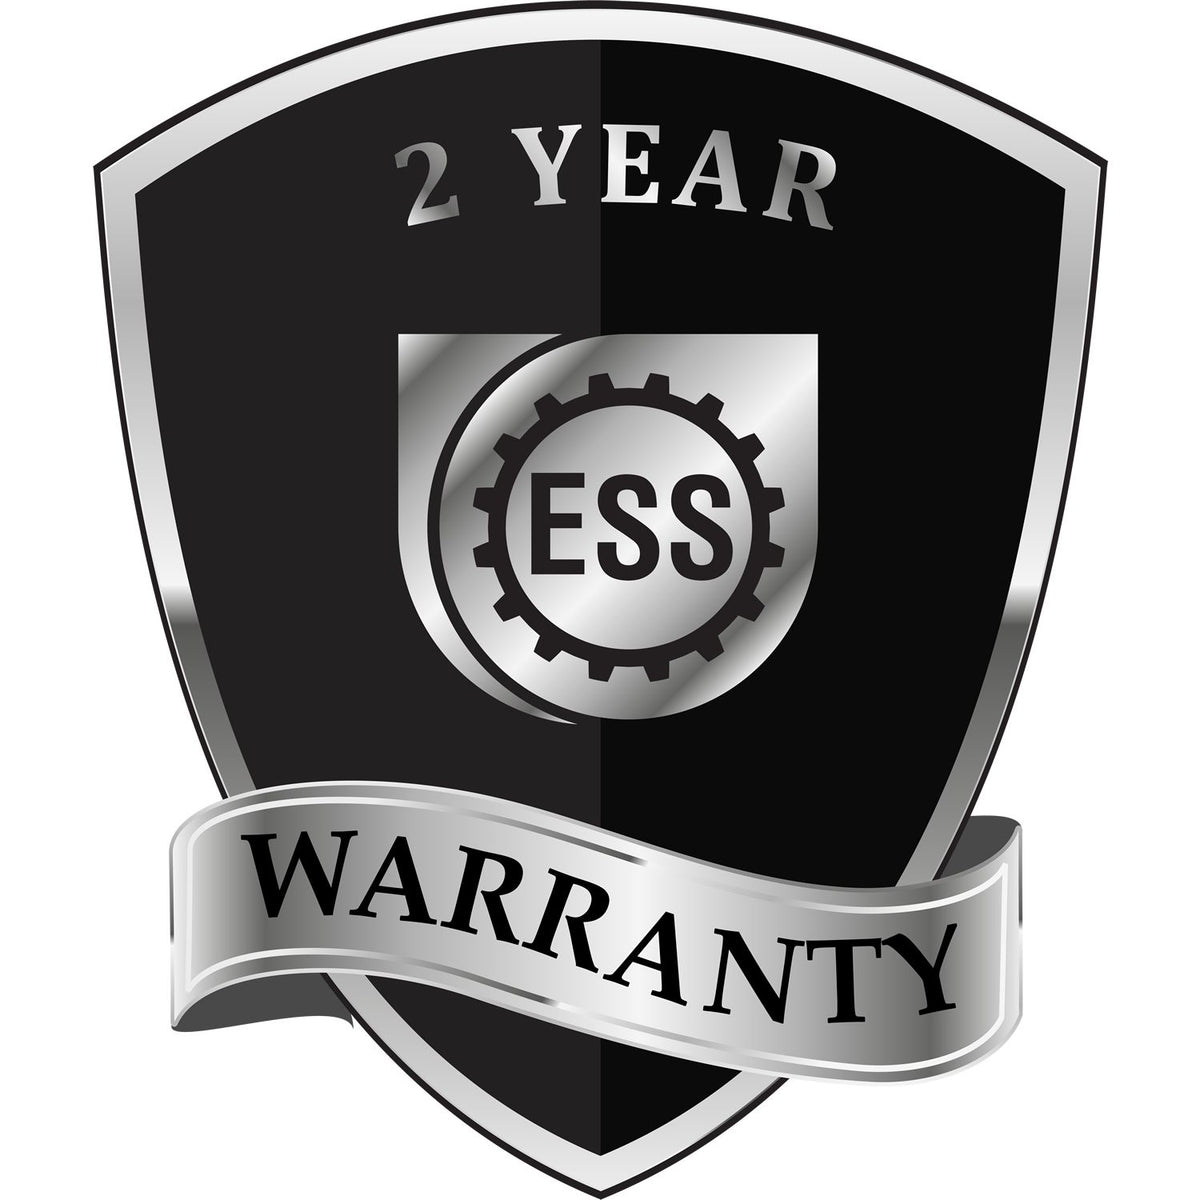 A black and silver badge or emblem showing warranty information for the Gift New Mexico Architect Seal